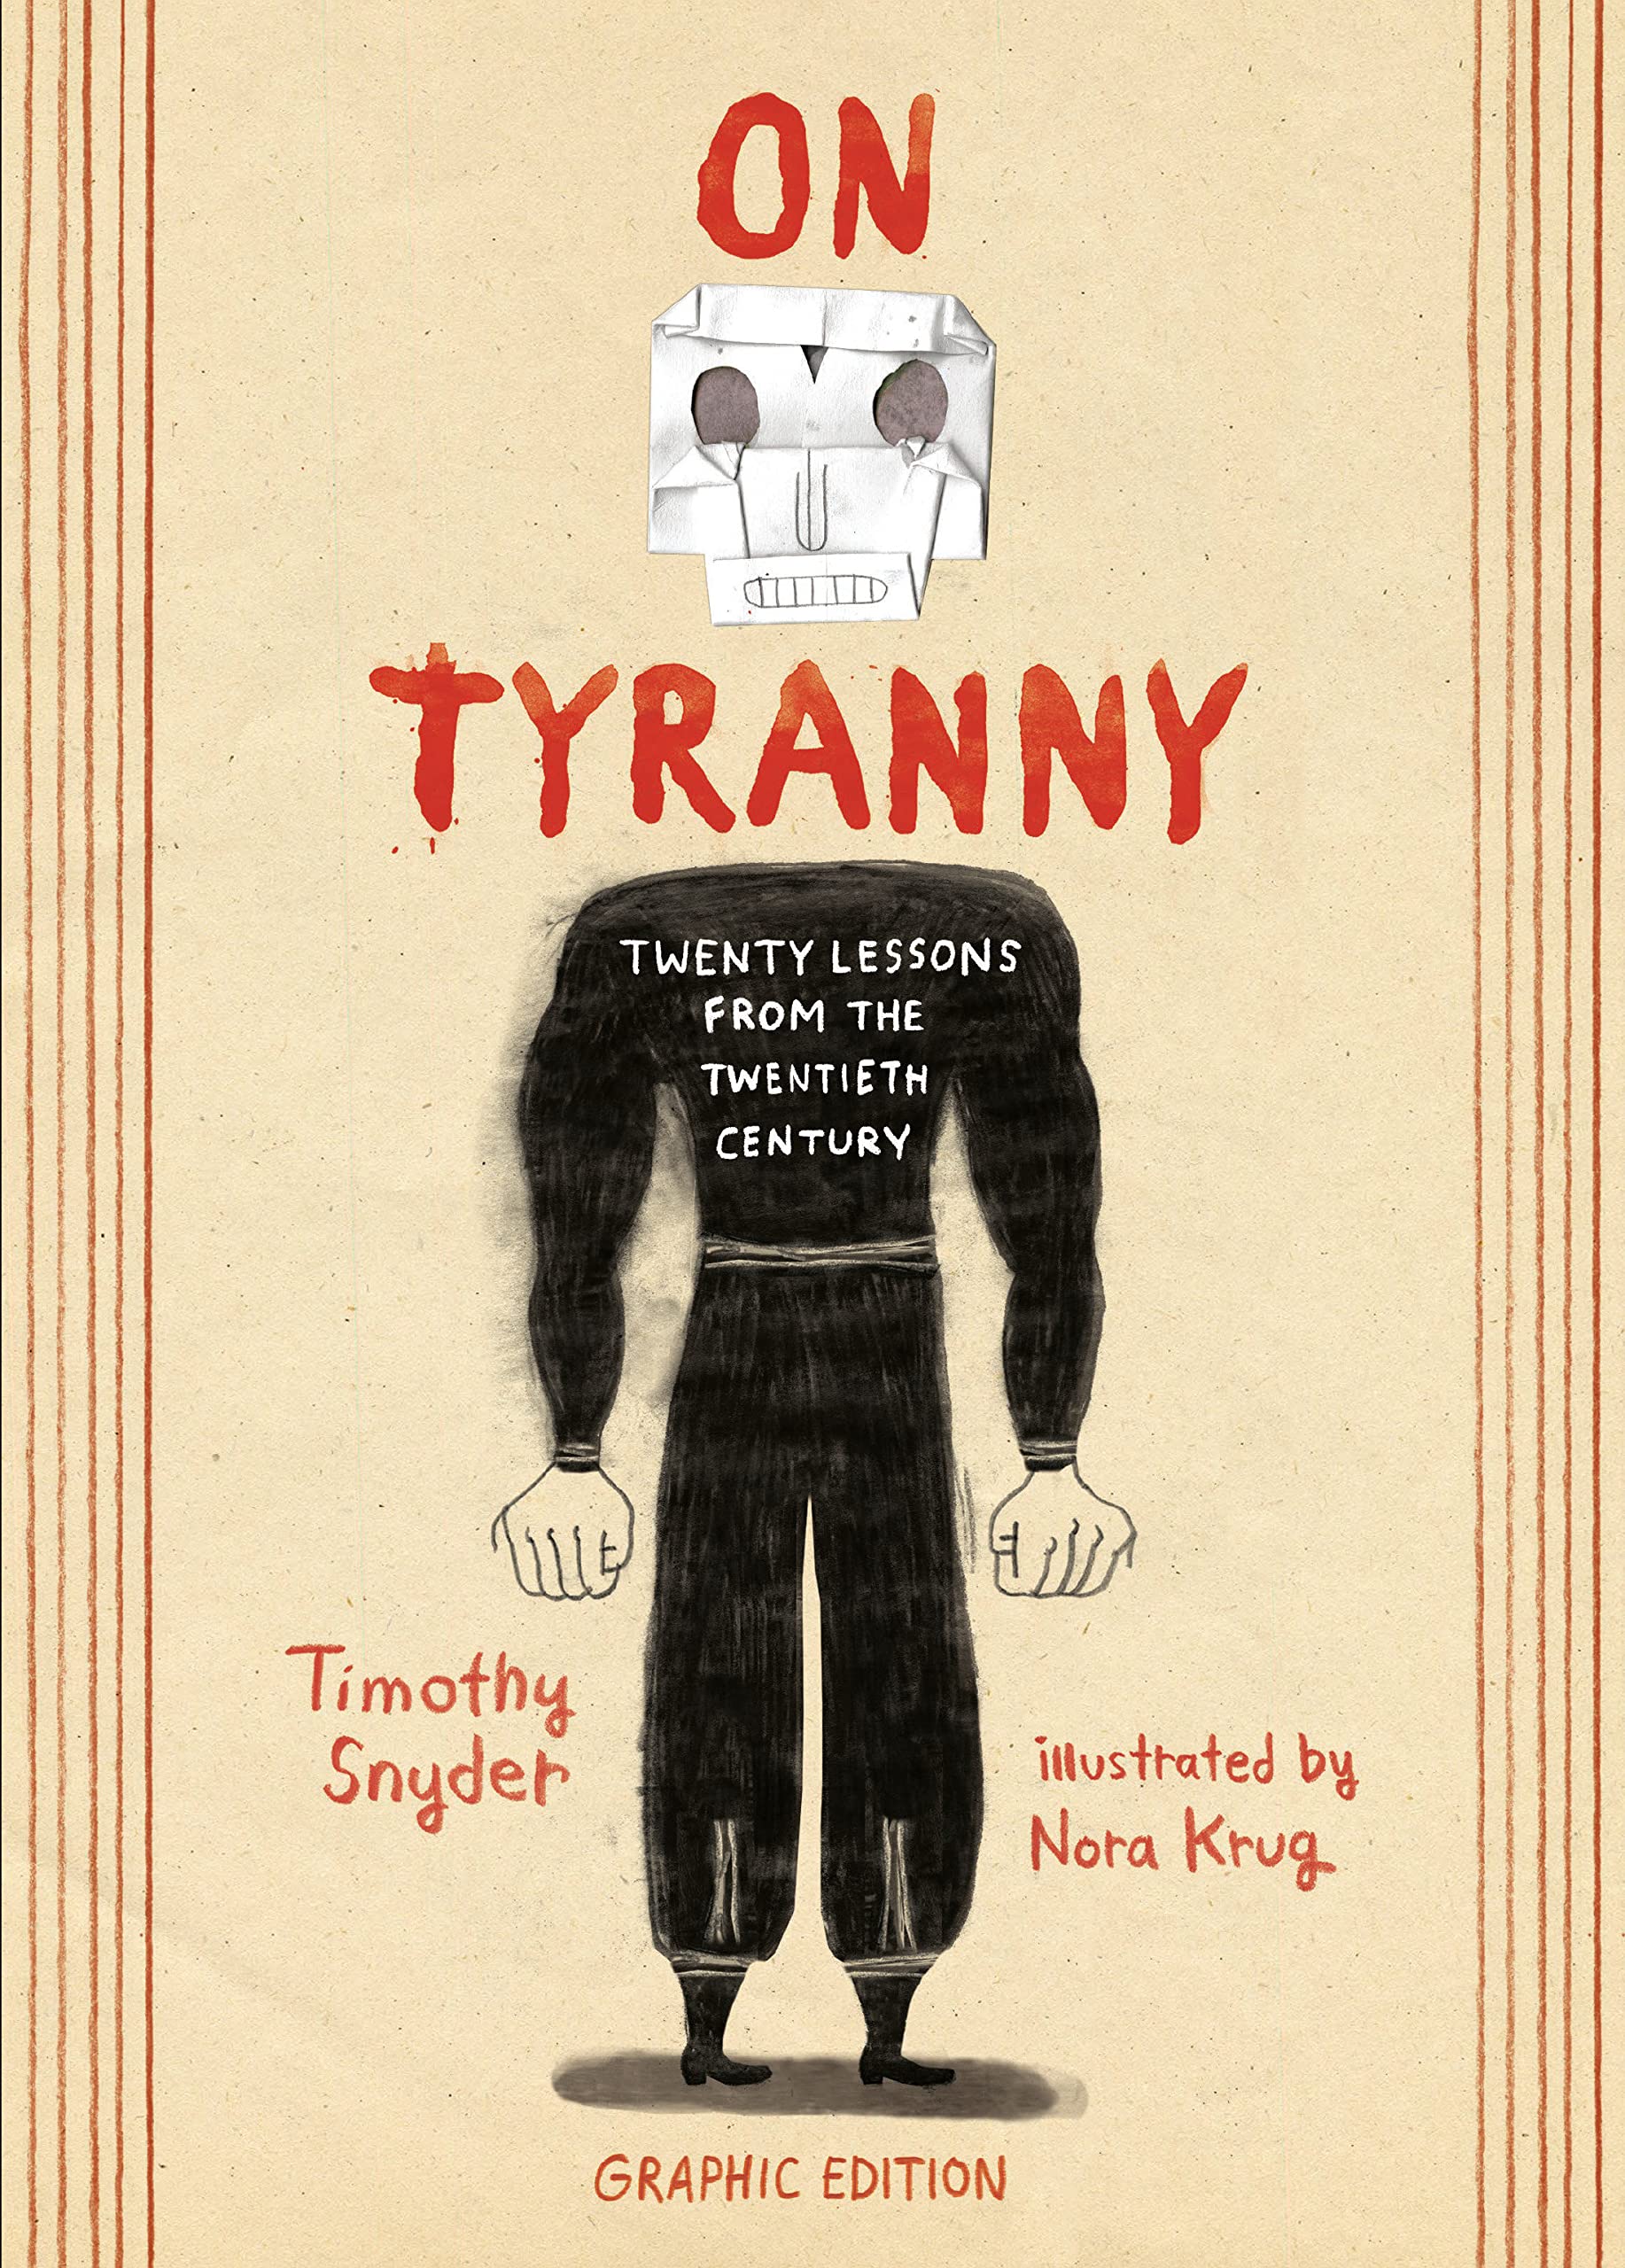 On Tyranny Graphic Edition | Timothy Snyder